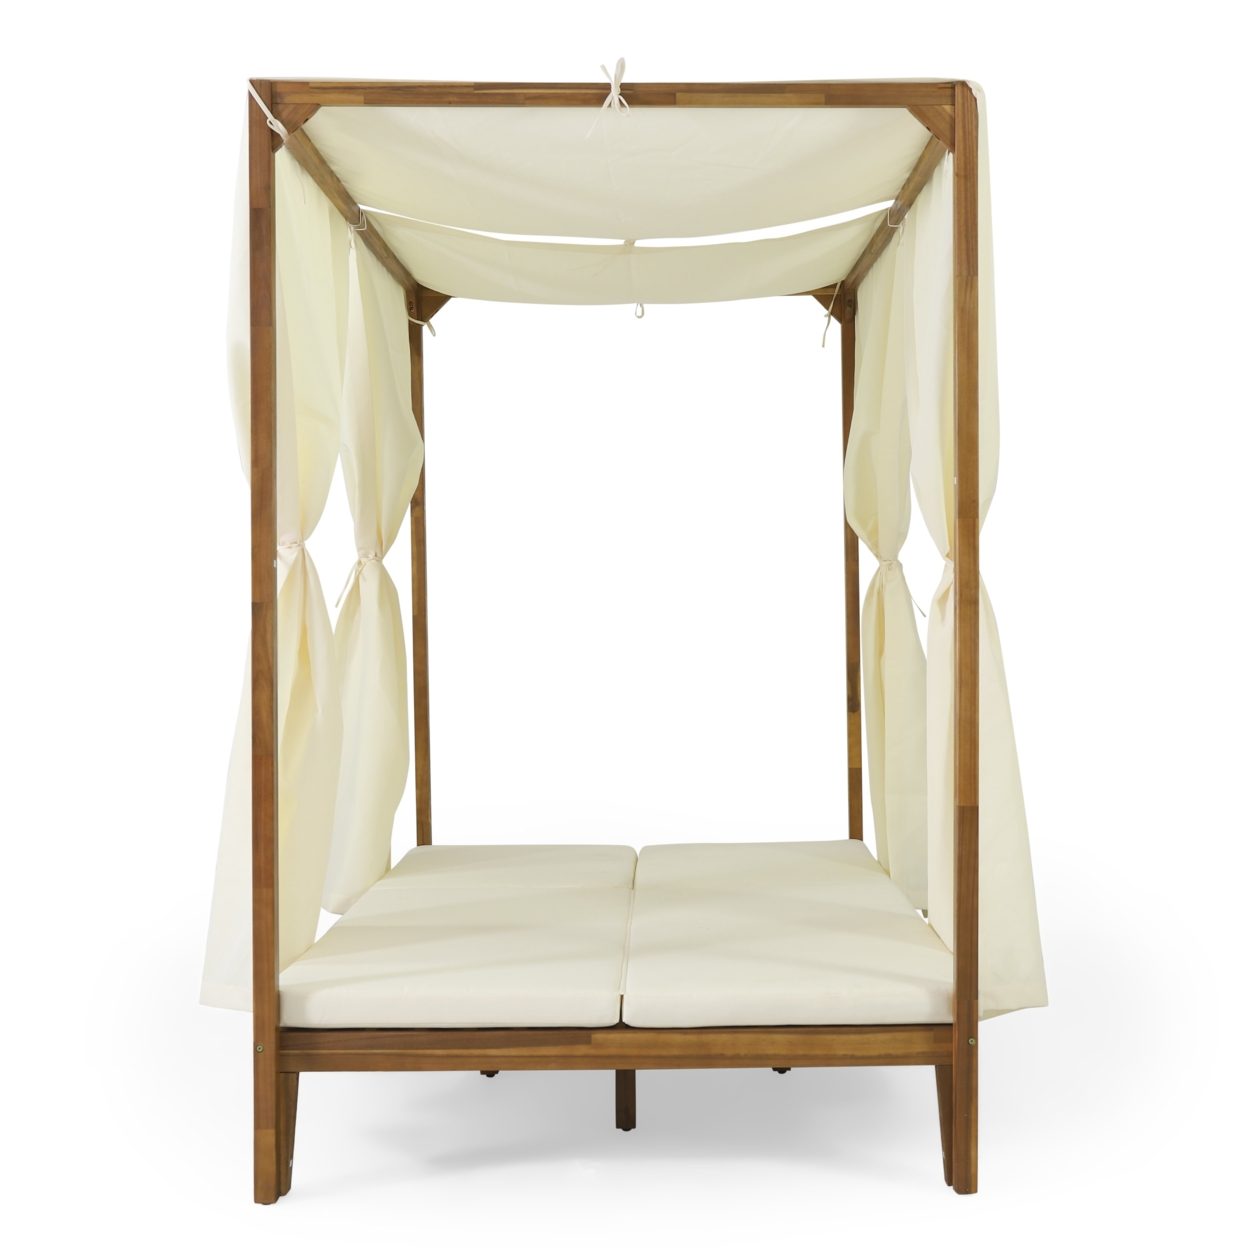 Leaverton Outdoor 2 Seater Adjustable Acacia Wood Daybed With Curtains - Teak Finish/cream